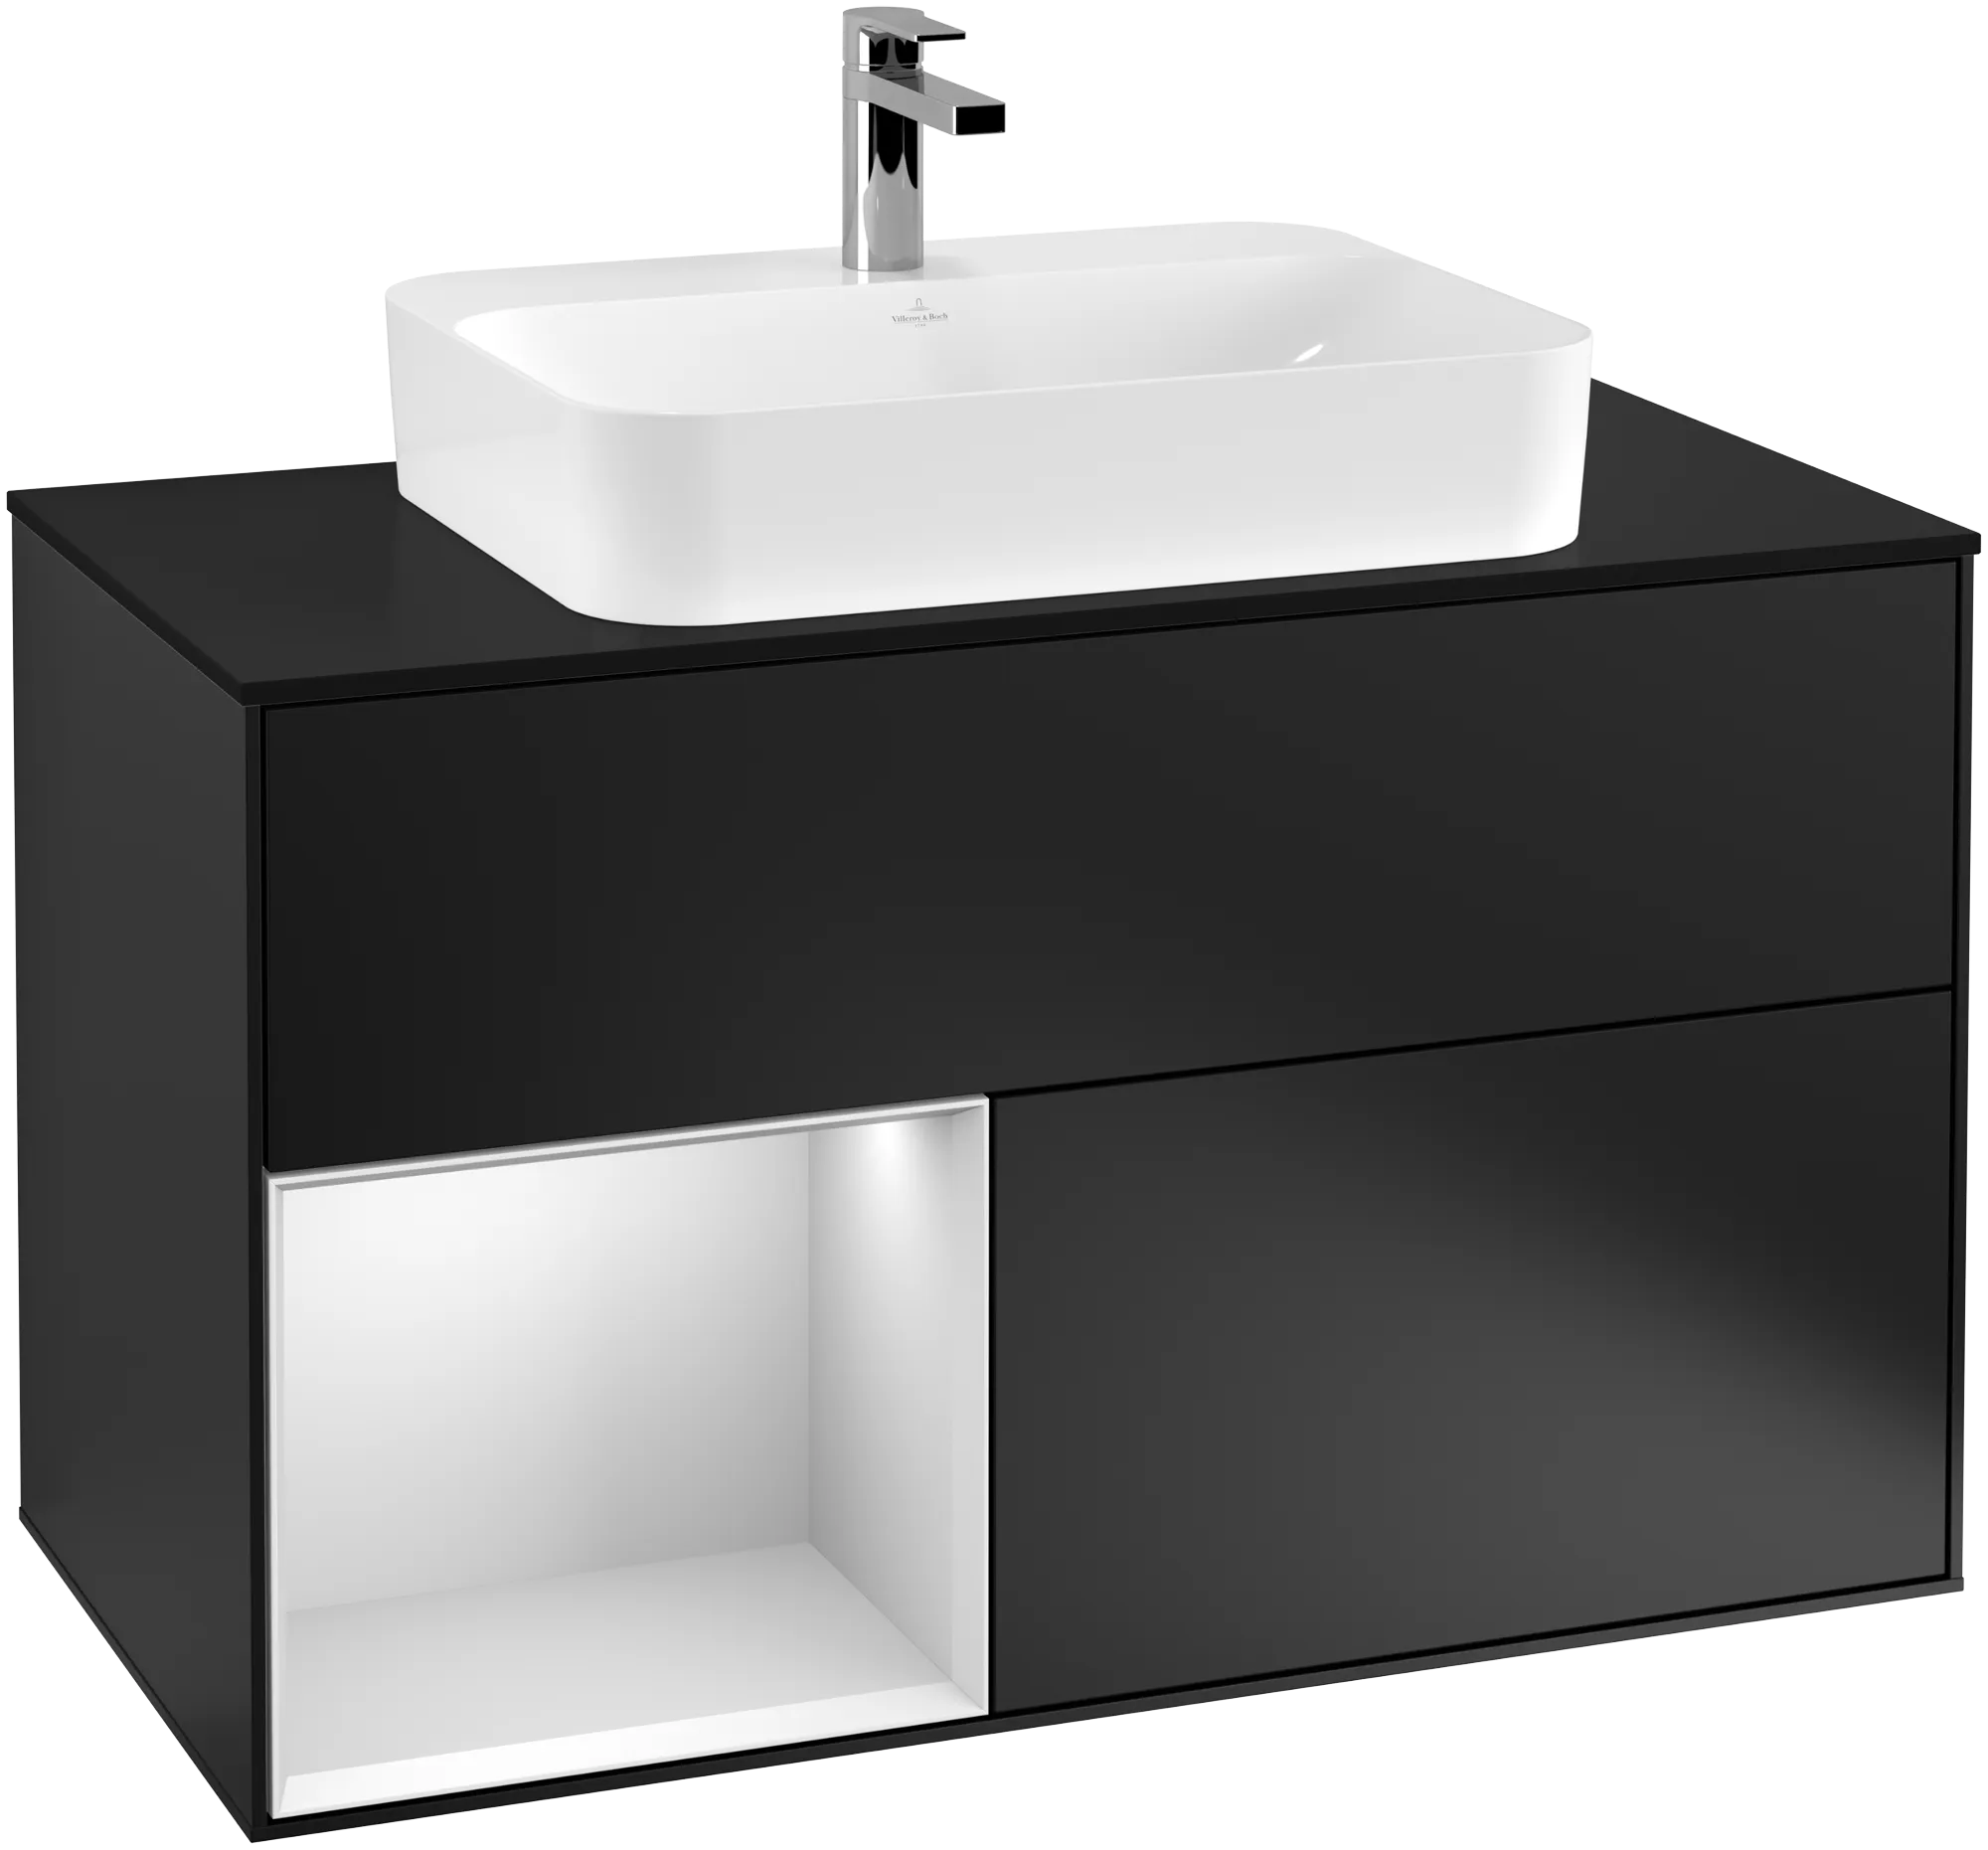 Obrázek VILLEROY BOCH Finion Vanity unit, with lighting, 2 pull-out compartments, 1000 x 603 x 501 mm, Black Matt Lacquer / White Matt Lacquer / Glass Black Matt #G362MTPD